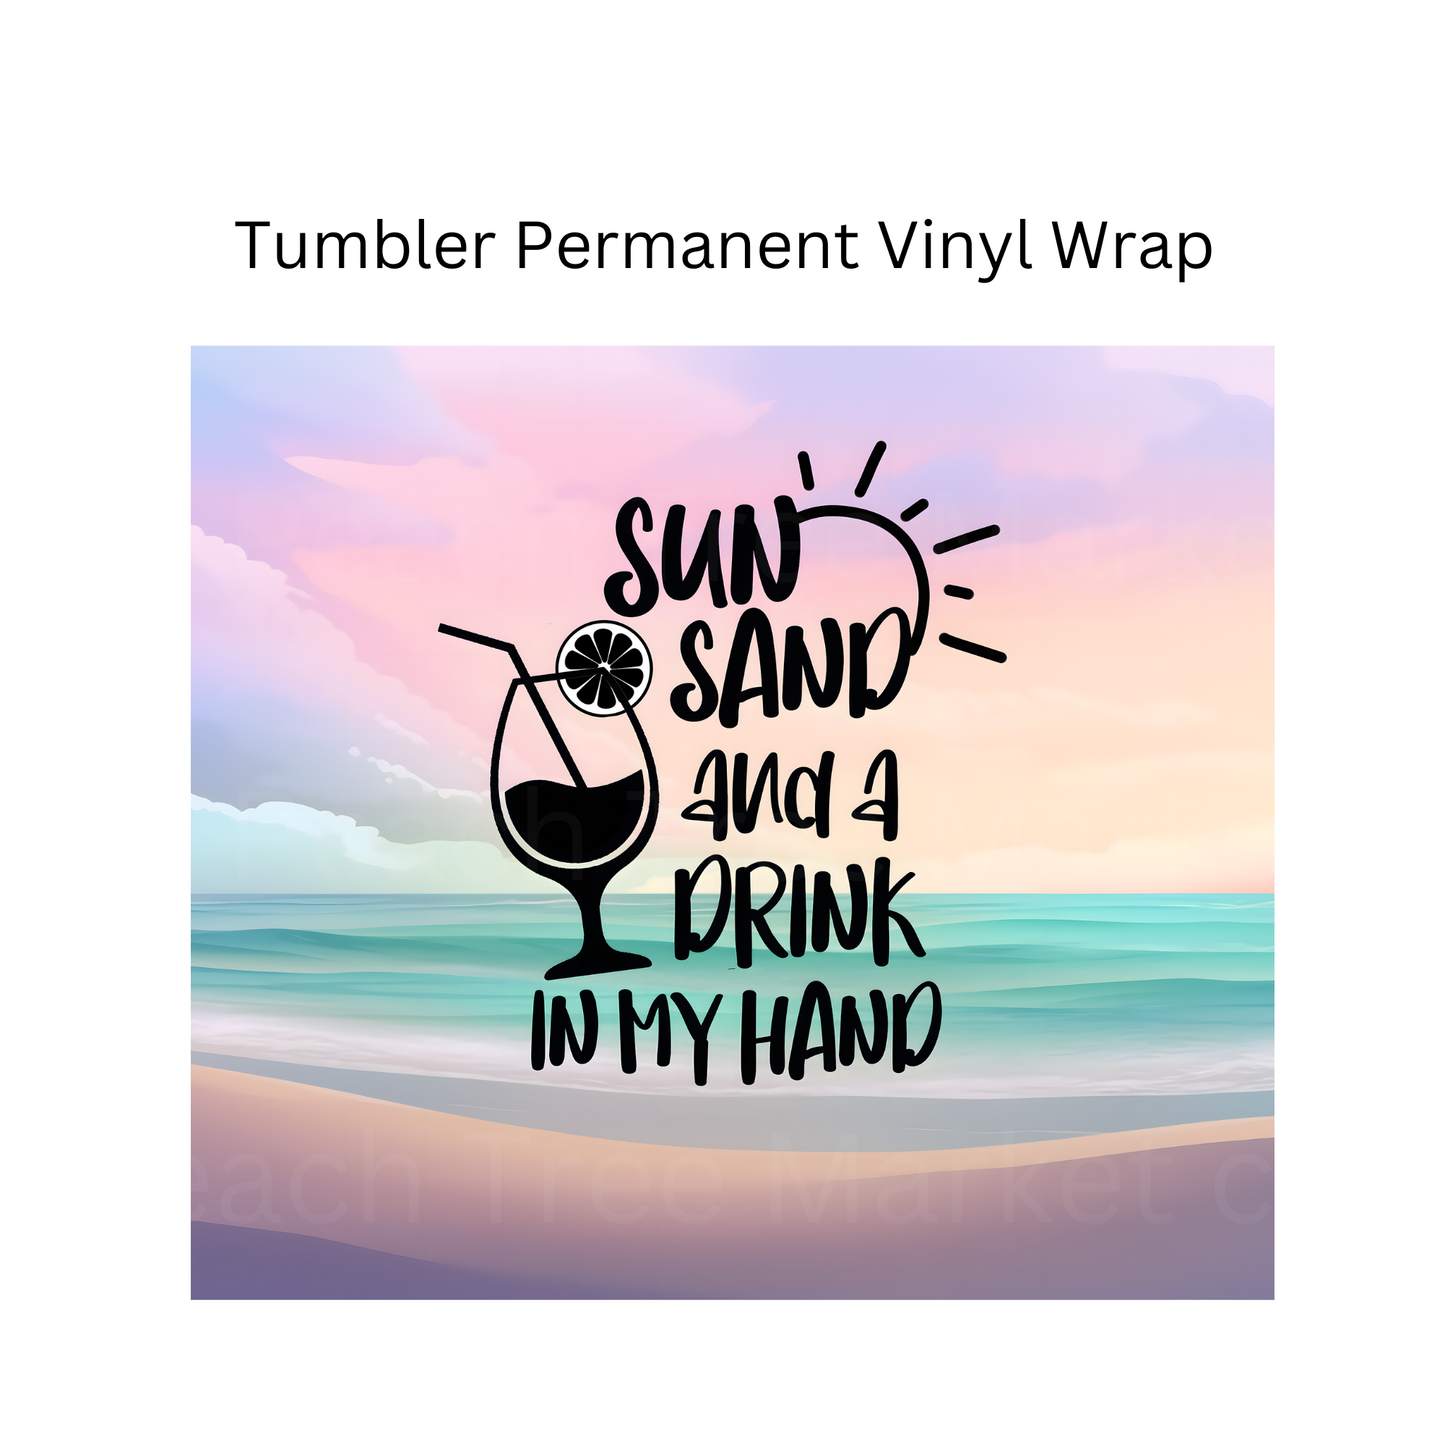 Sun, Sand and a Drink In My Hand 20oz Permanent Vinyl Wrap